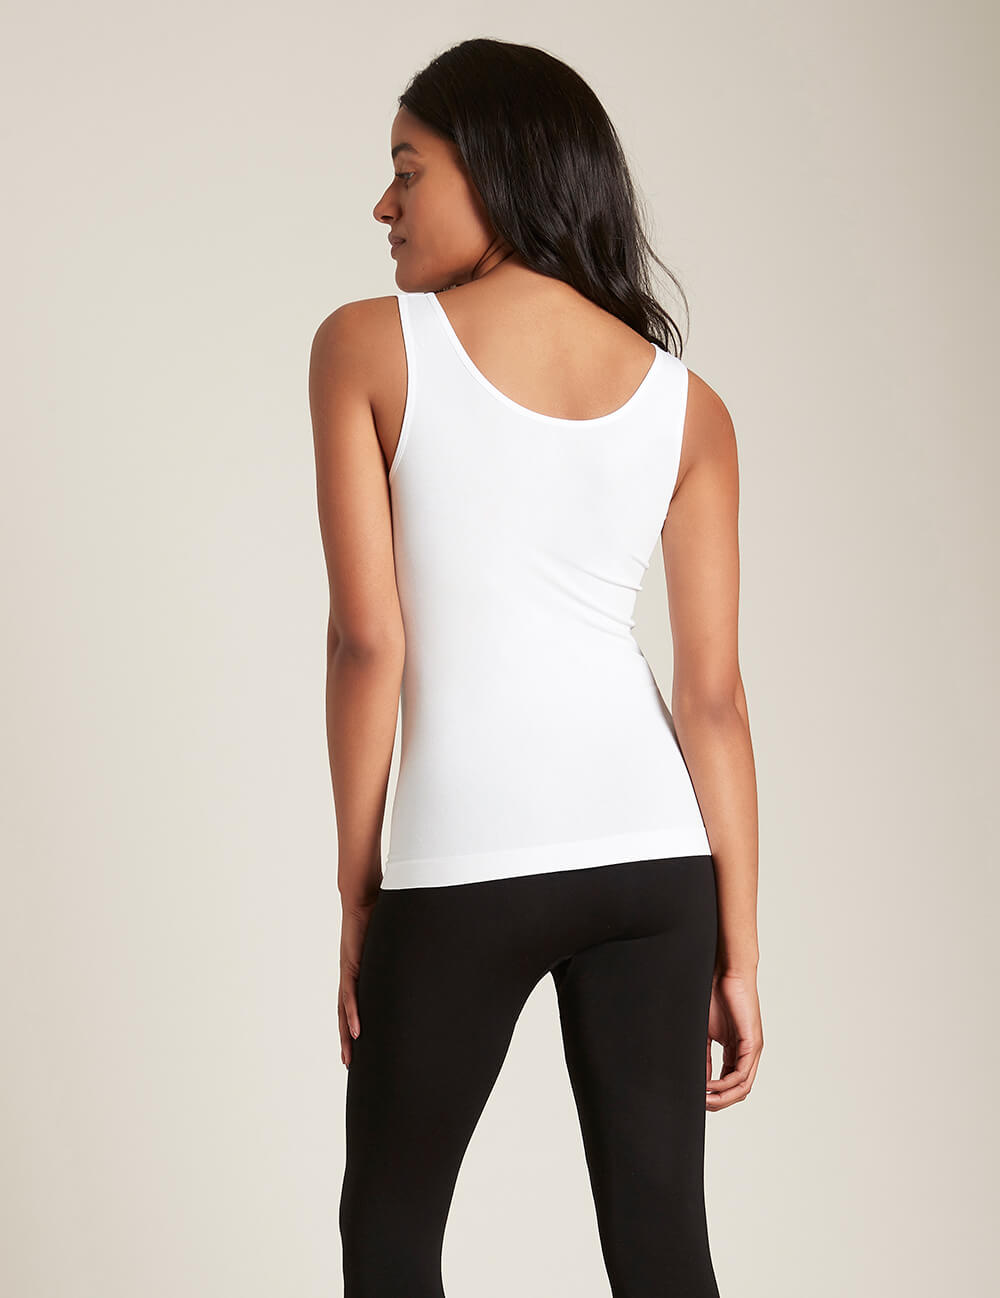 Women's Tank Top | Bamboo Clothes For Women | Boody